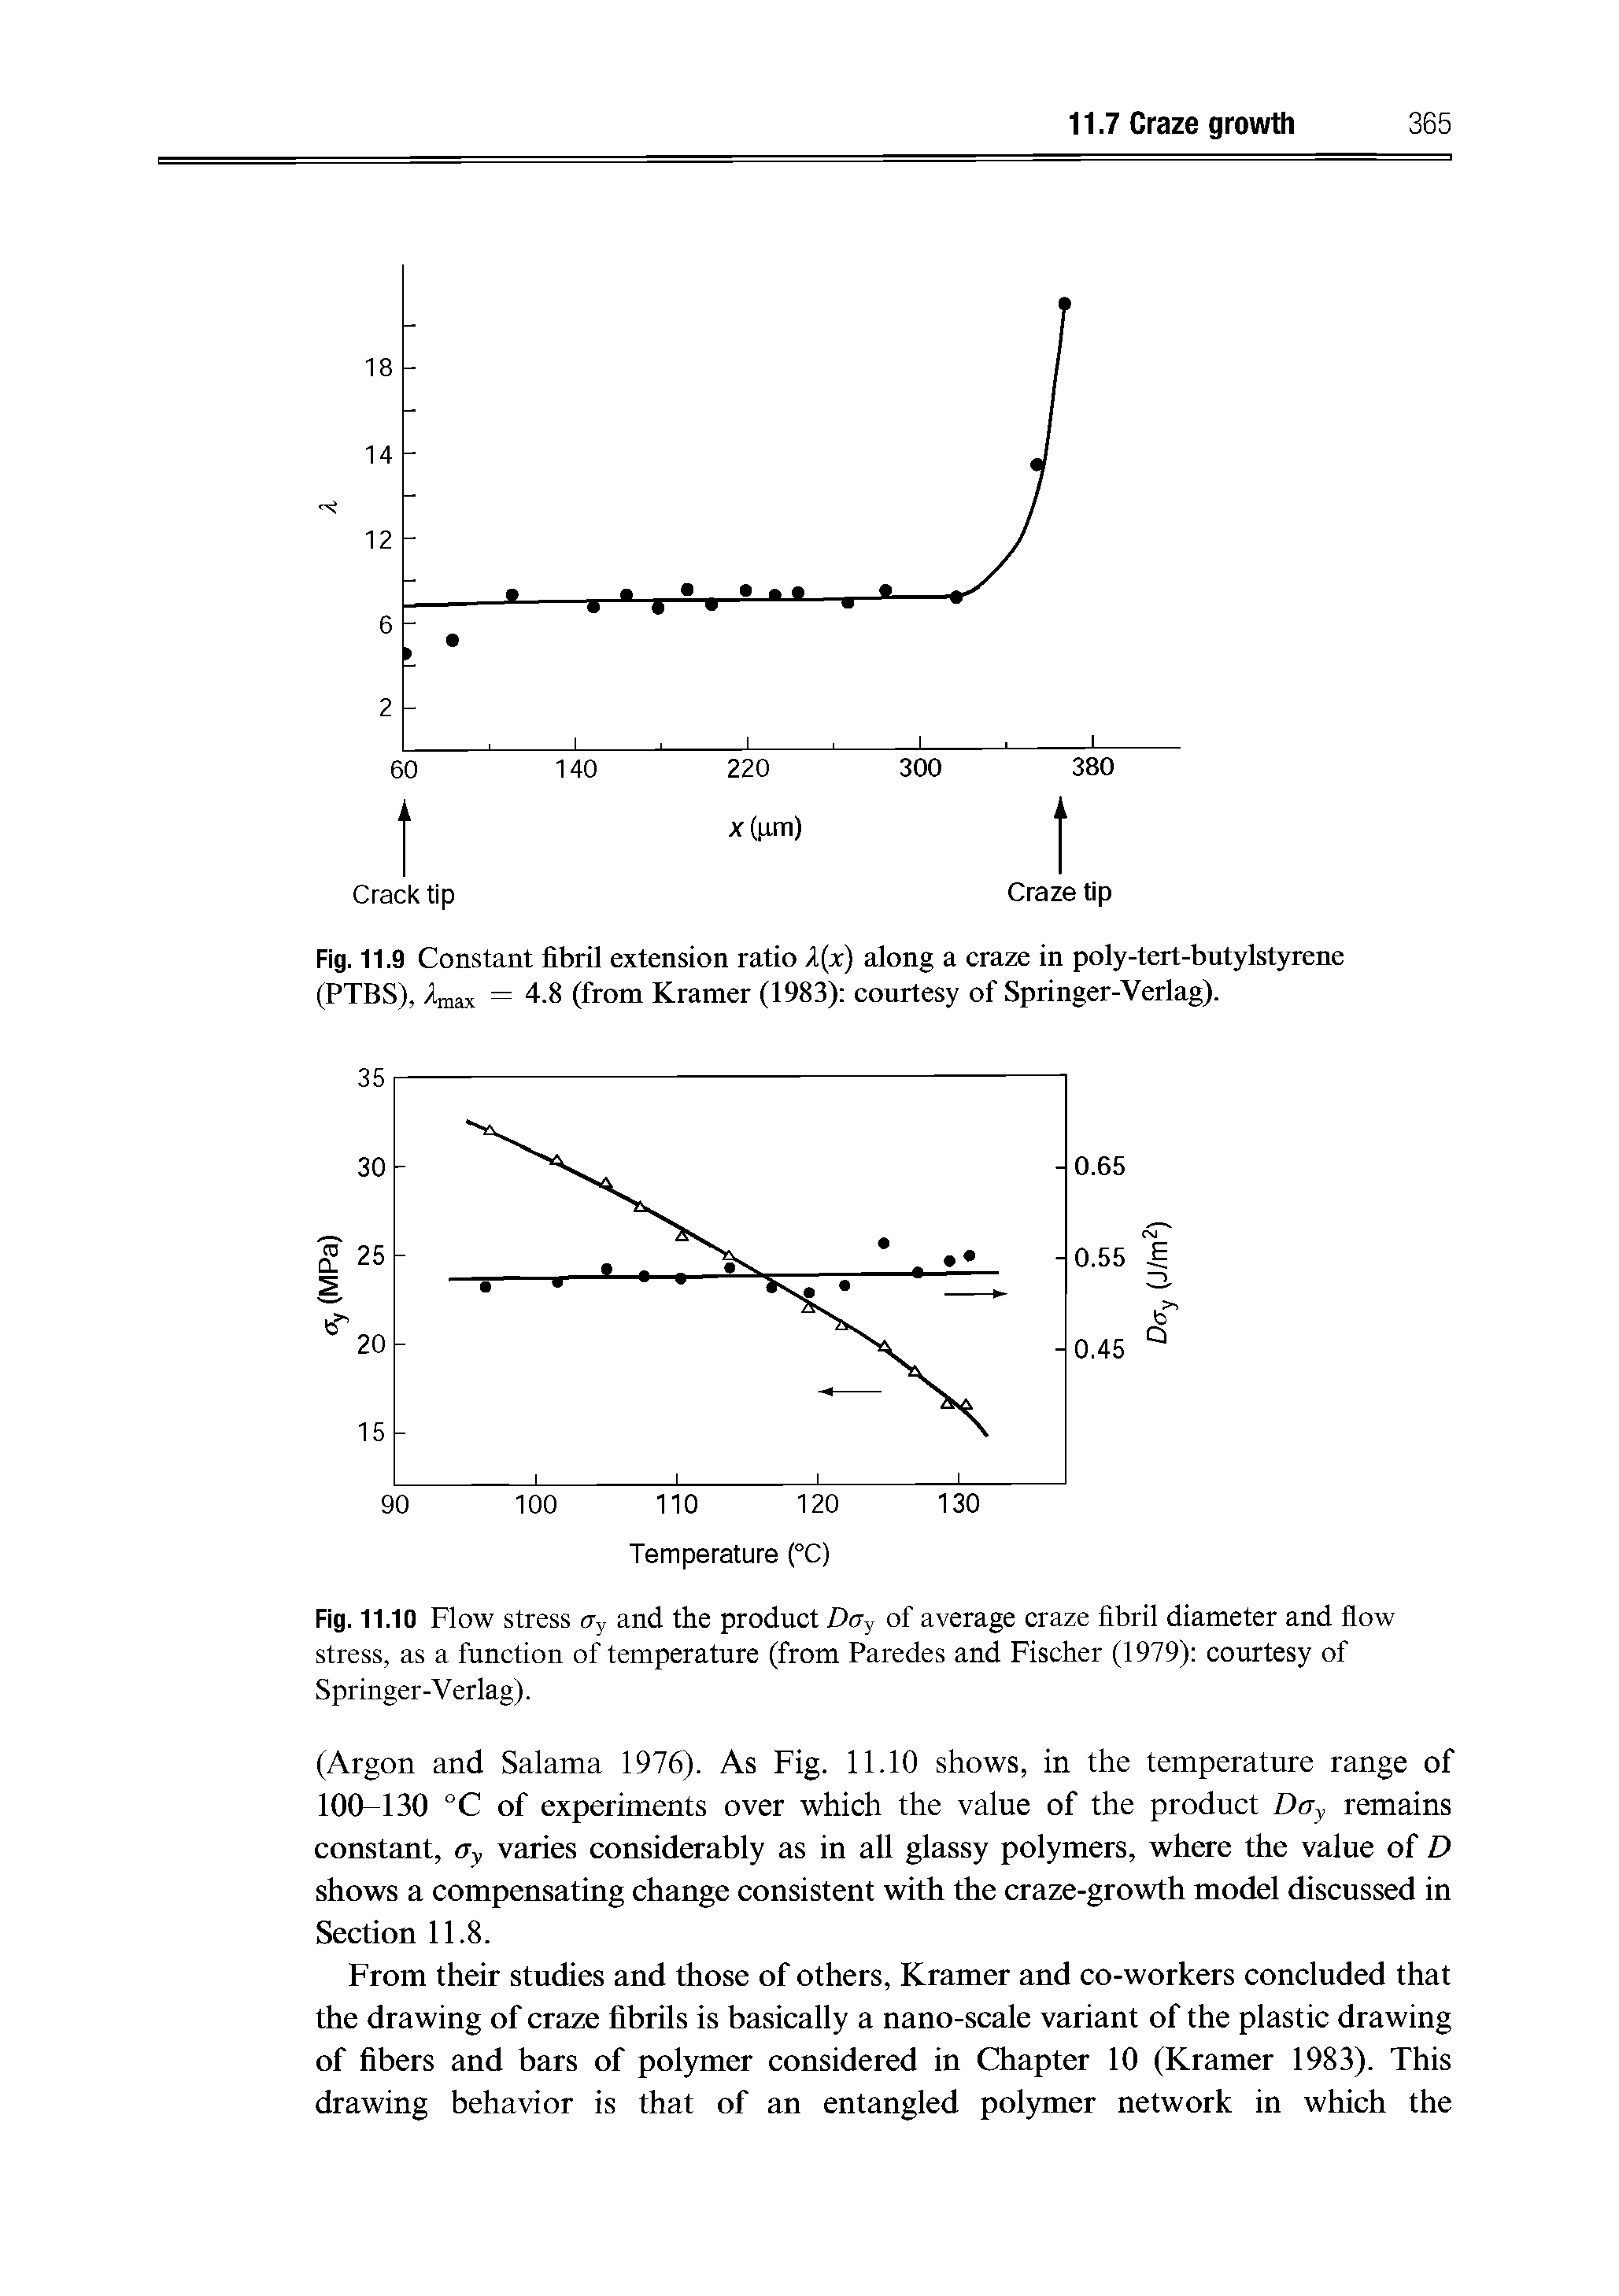 Fig. 11.10 Flow stress ay and the product Day of average craze fibril diameter and flow stress, as a function of temperature (from Paredes and Fischer (1979) courtesy of Springer-V erlag).